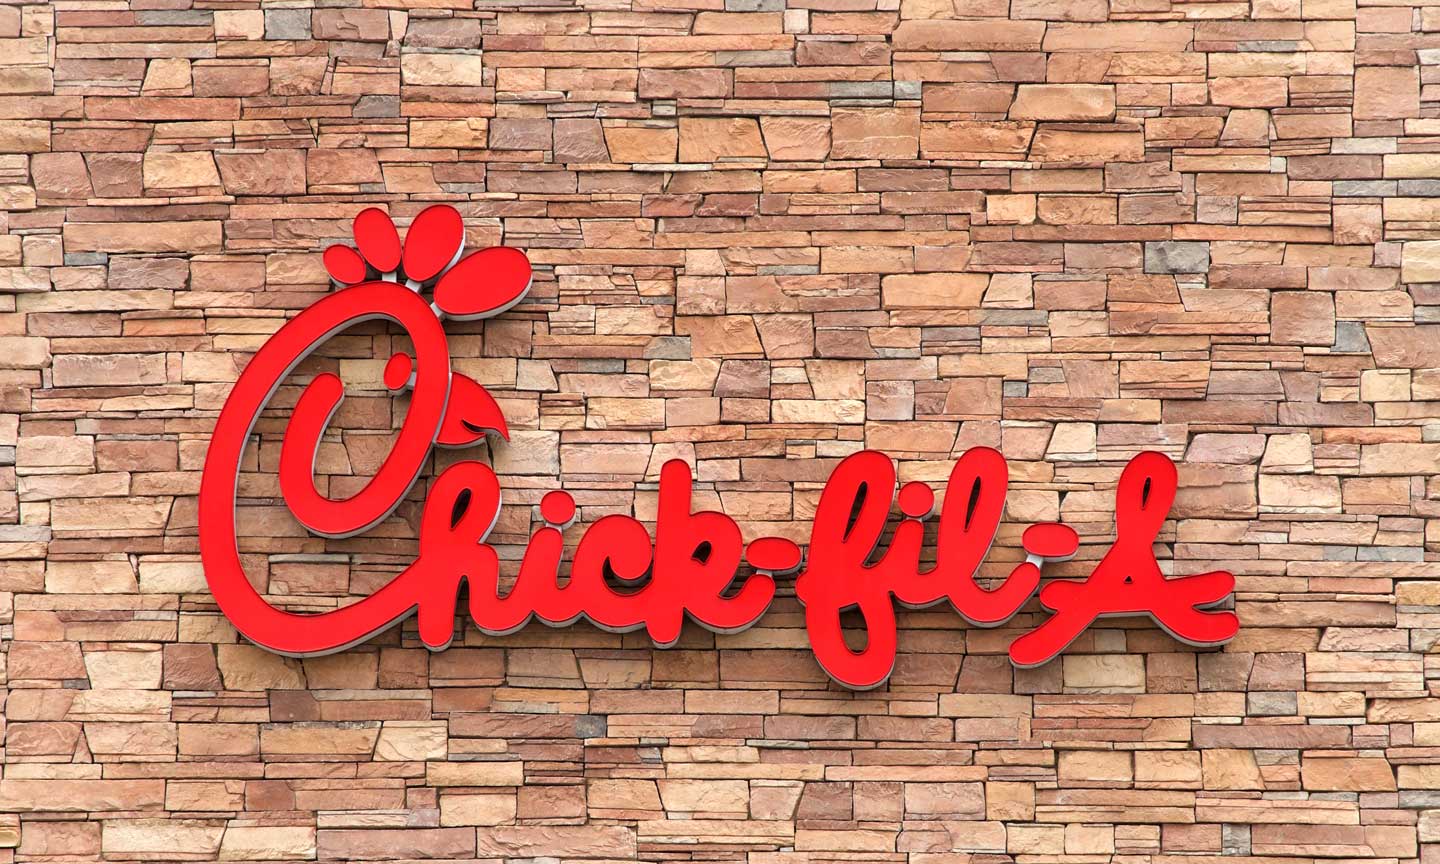 Competitive analysis: Chick-fil-A dominates: Discover why 92% of fast-food enthusiasts prefer it.